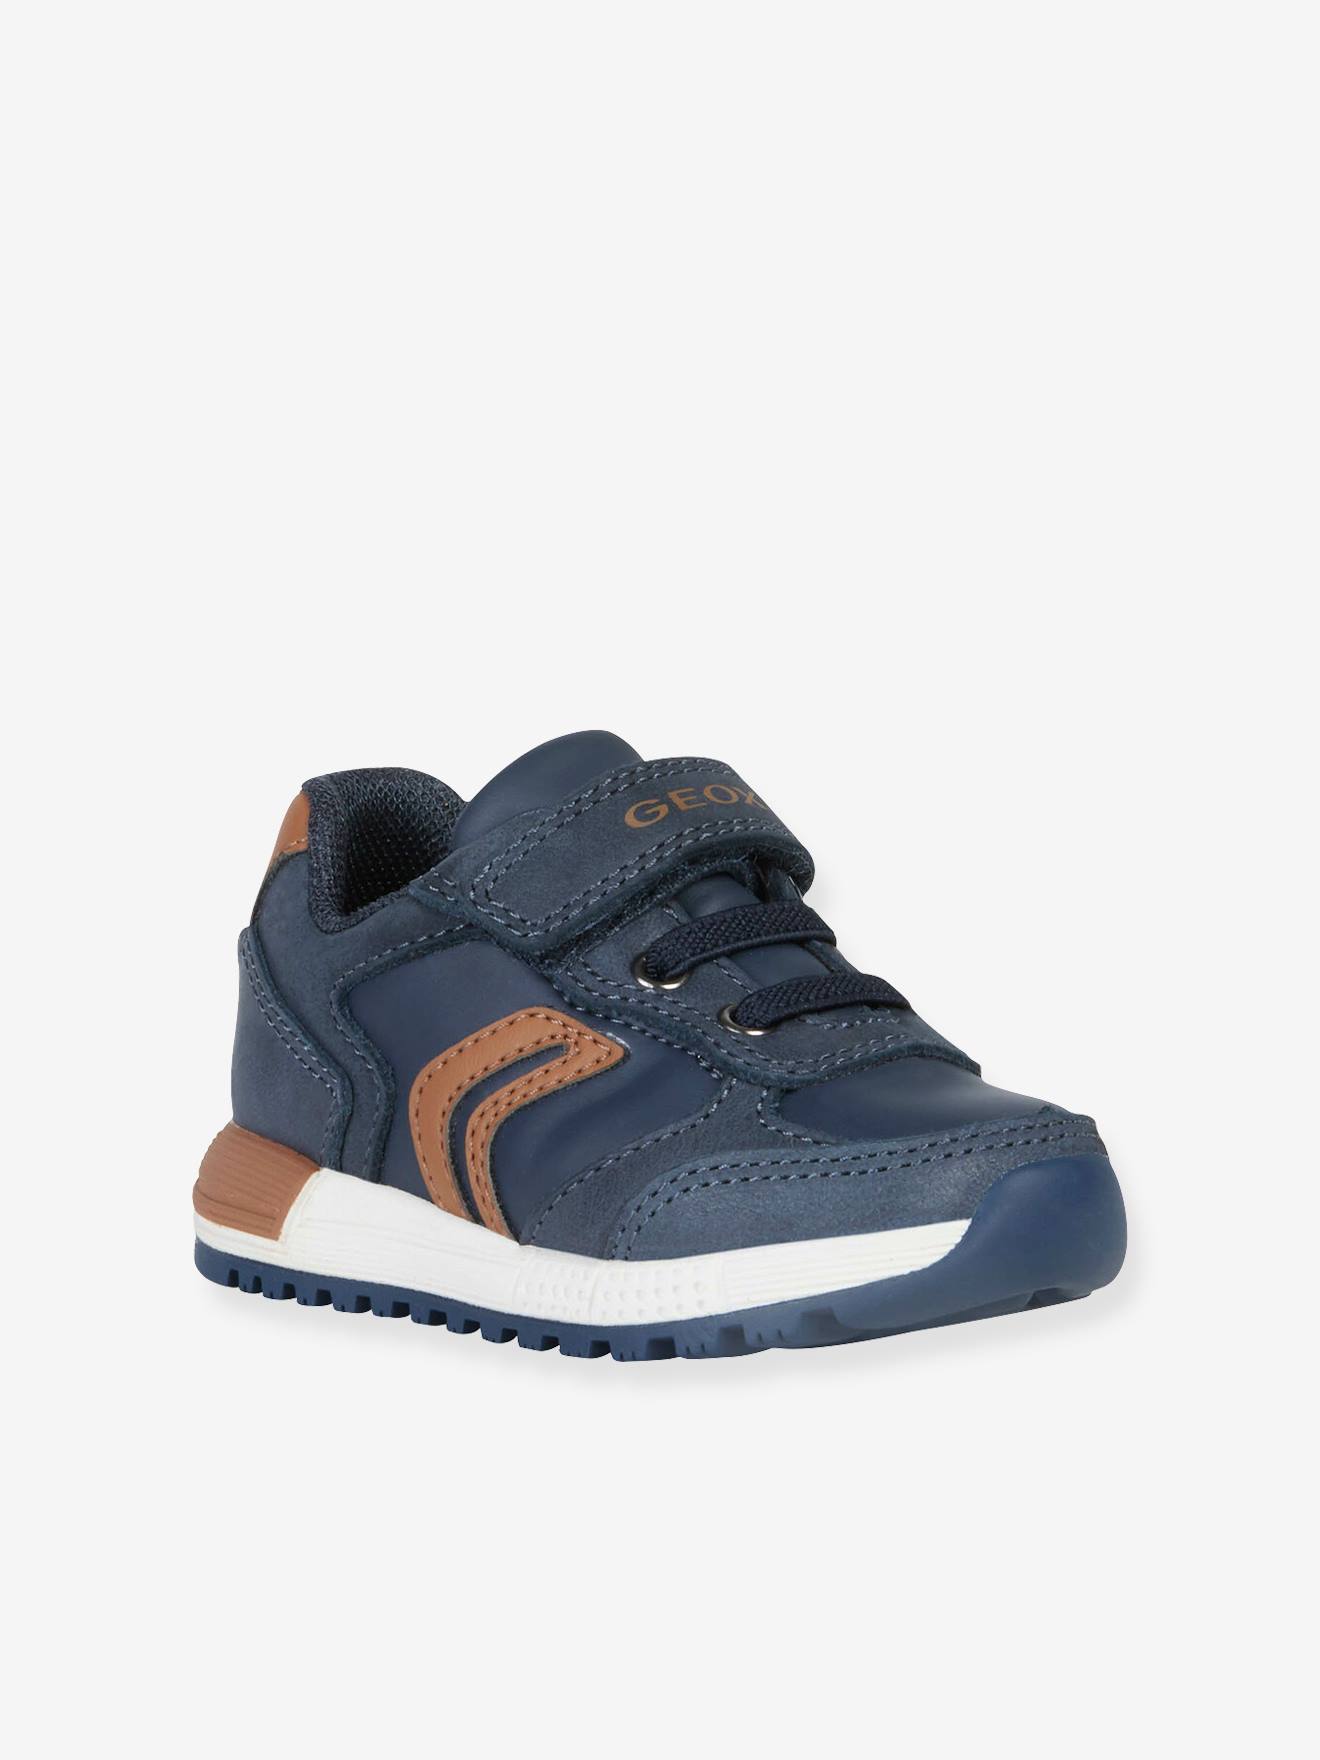 Alben Boy B Trainers for Baby Boys, by 